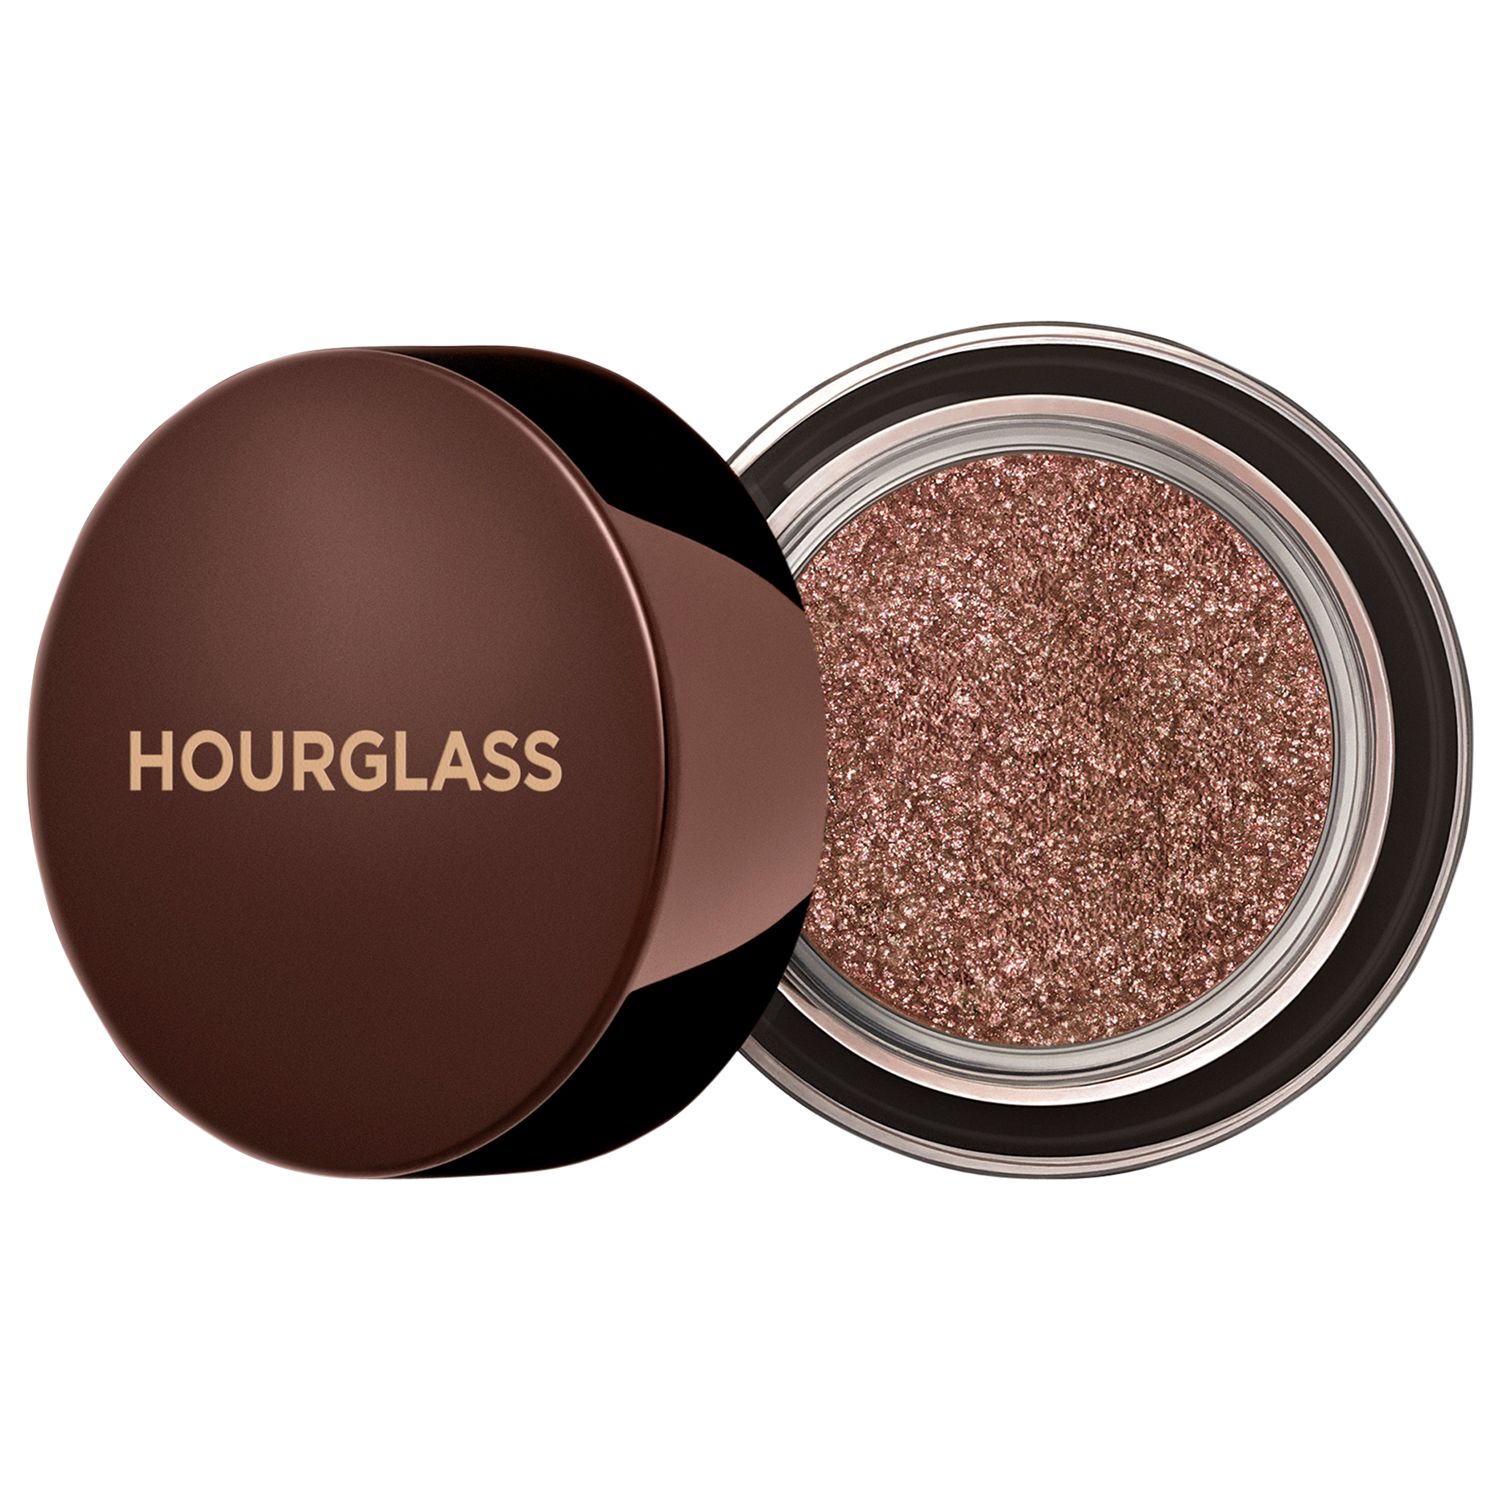 Hourglass Scattered Light Glitter Eyeshadow, Reflect at John Lewis ...